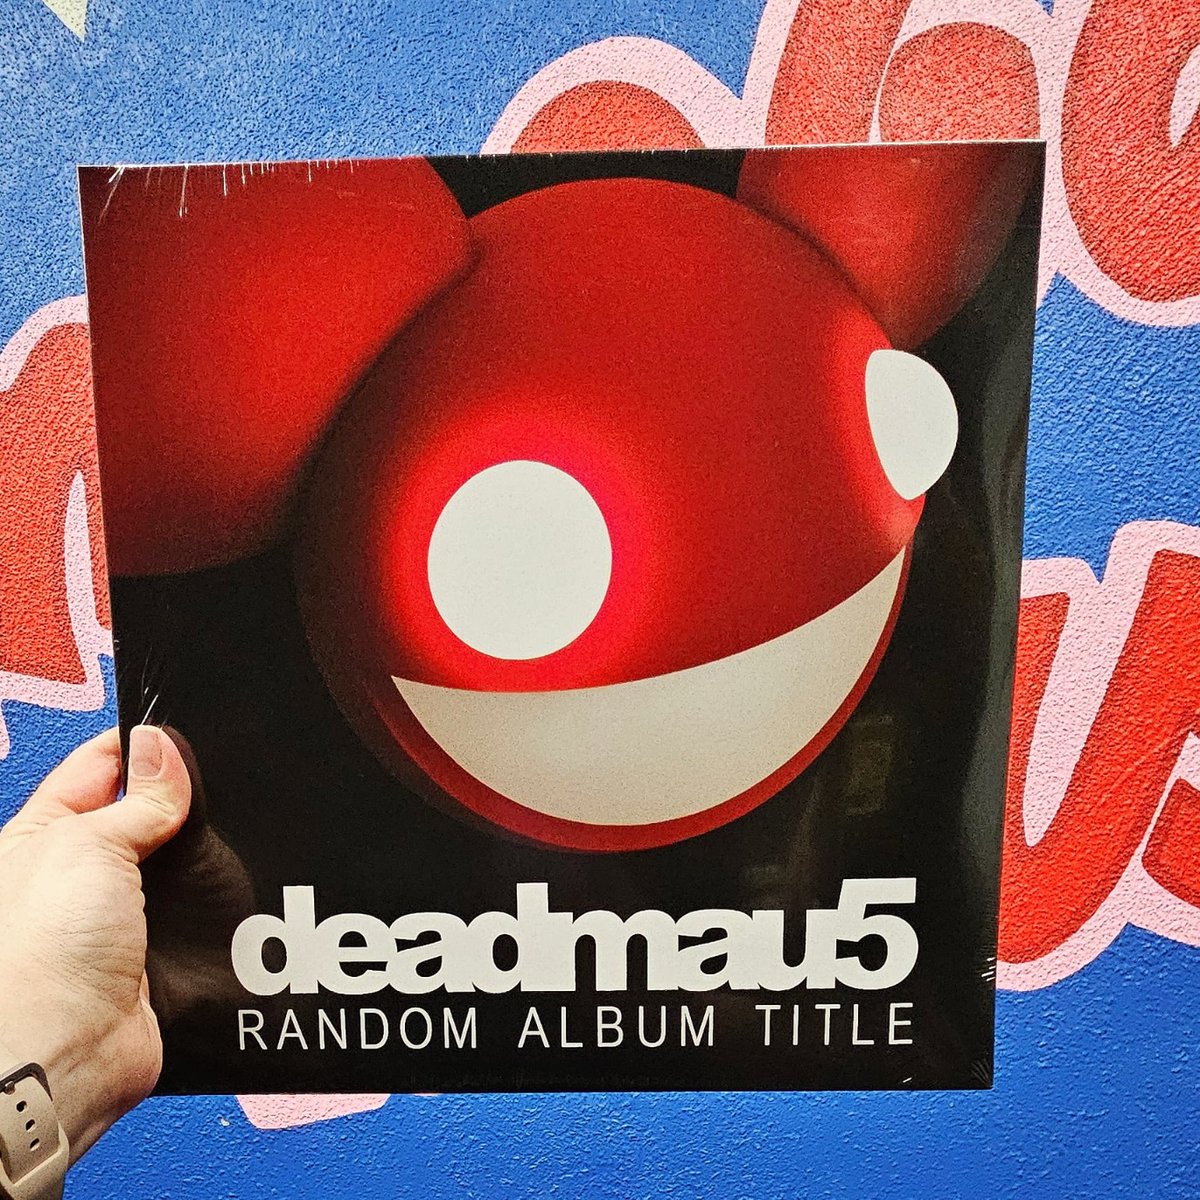 .@deadmau5 is signing the new vinyl release of 'Random Album Title' at Amoeba Hollywood tomorrow (April 25) at 12pm! Tickets for this event are available now with pre-order of the 'Random Album Title' LP in-store only at Amoeba. Space is limited! Info: bit.ly/3VNS4pa